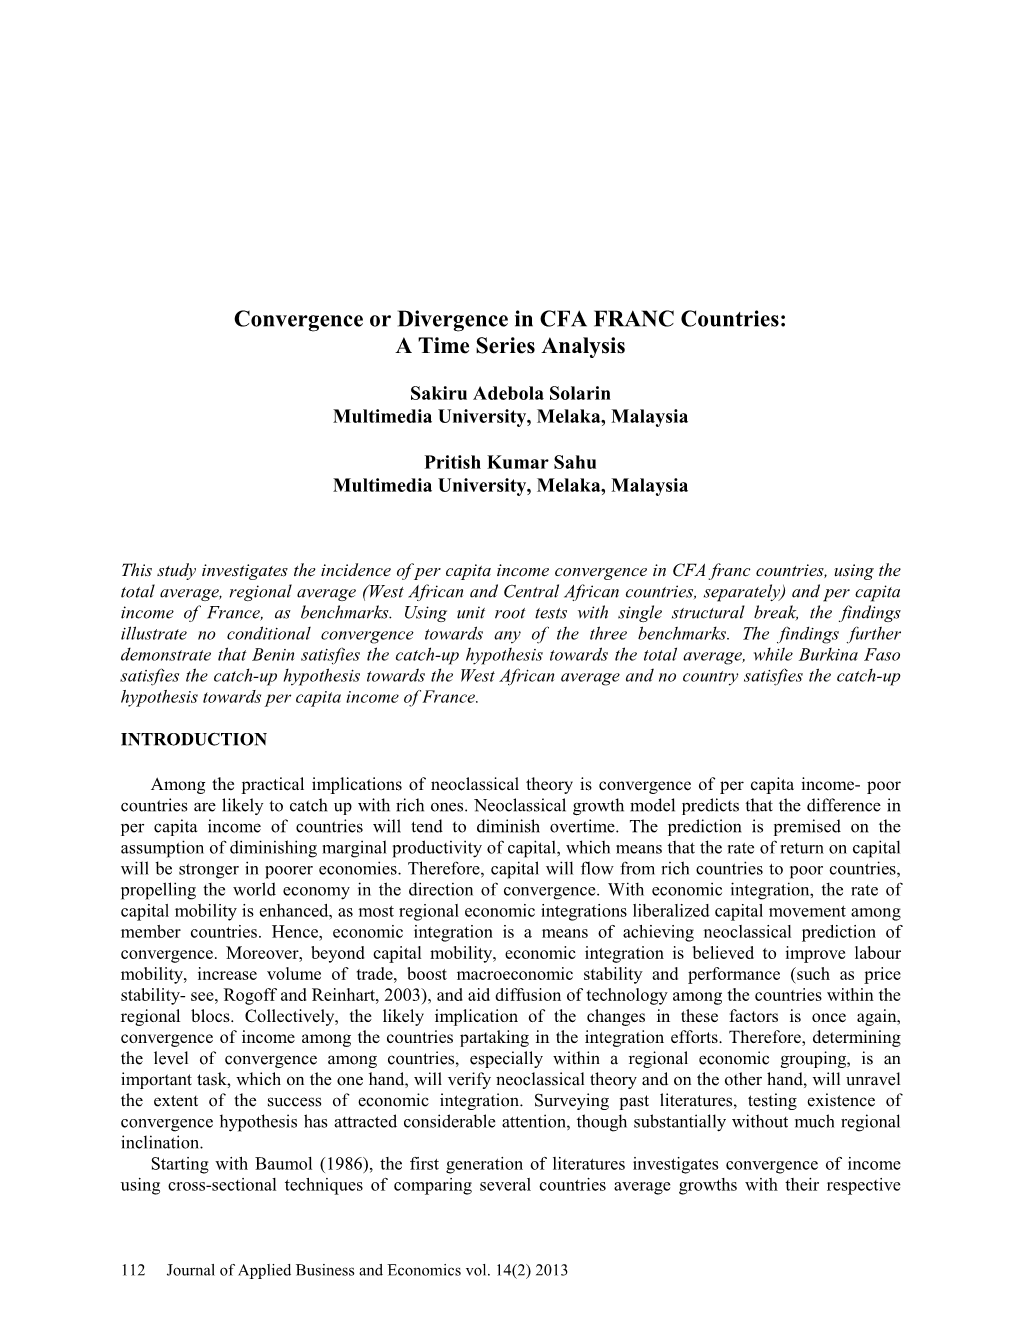 Convergence Or Divergence in CFA FRANC Countries: a Time Series Analysis